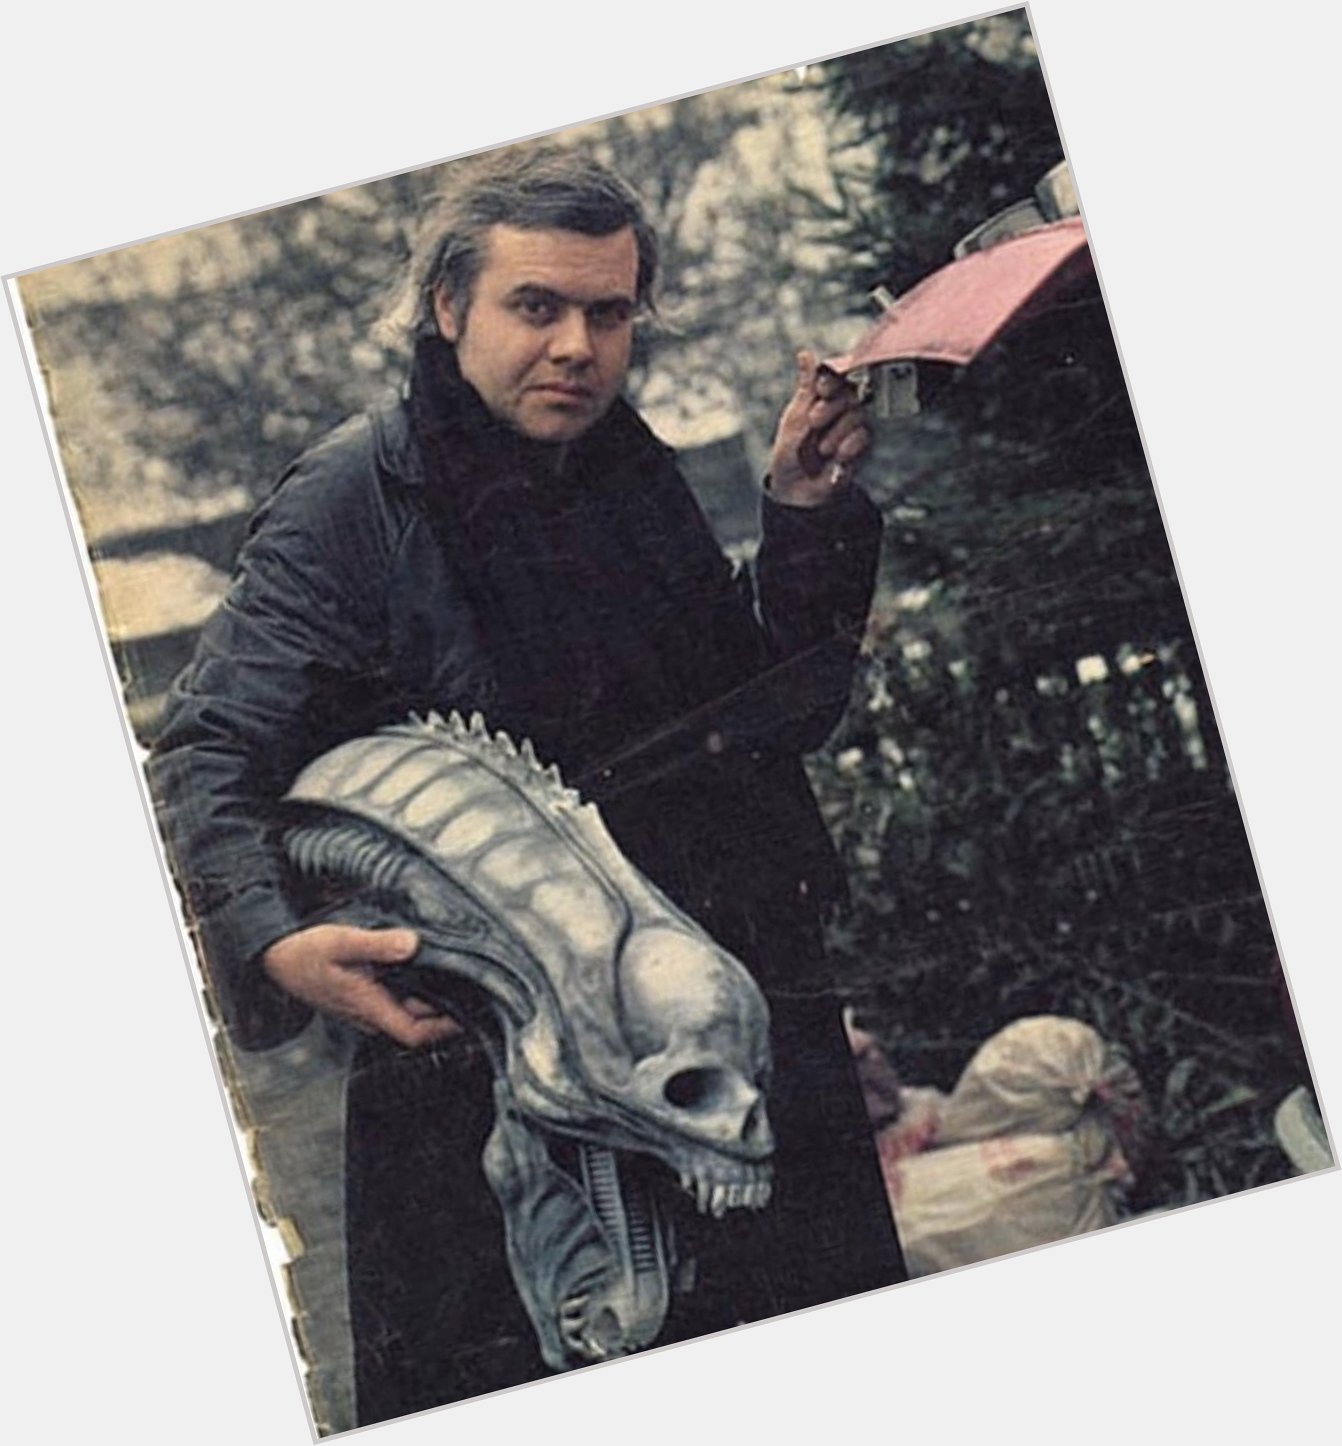 Happy Birthday to my artistic role model. H.R.Giger 